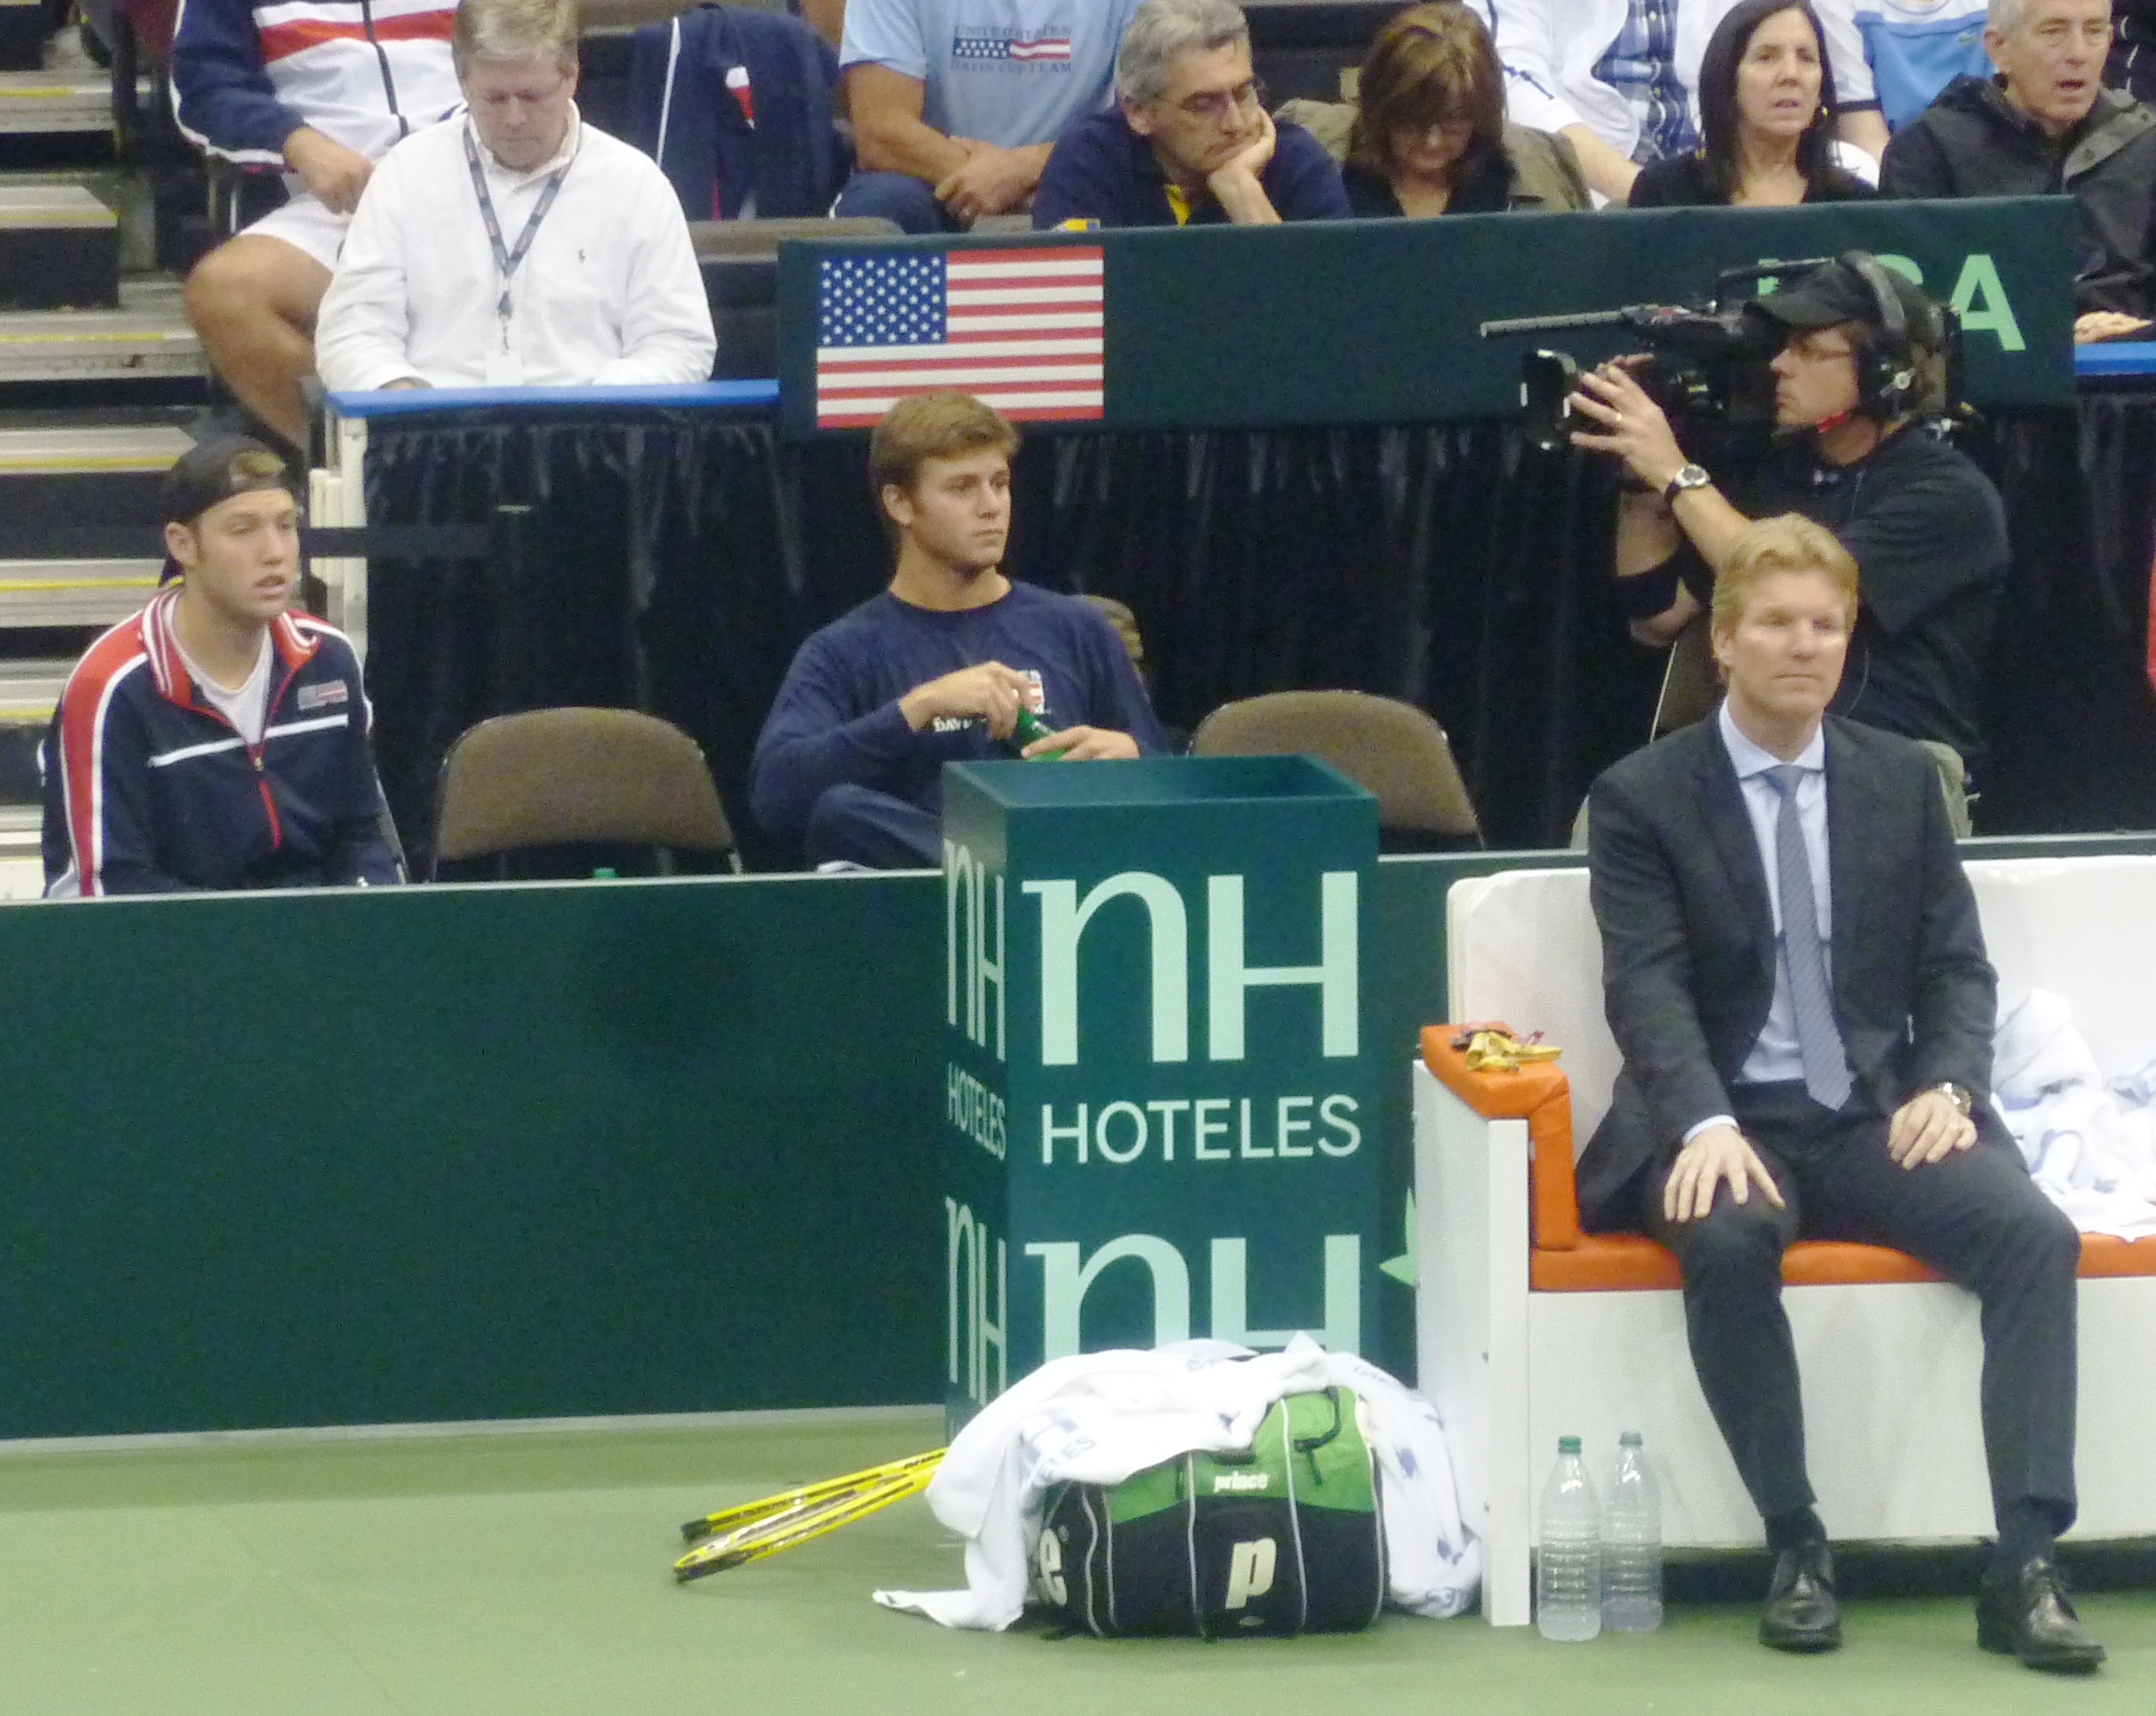 Captain Courier with Jack Sock and Ryan Harrison watching